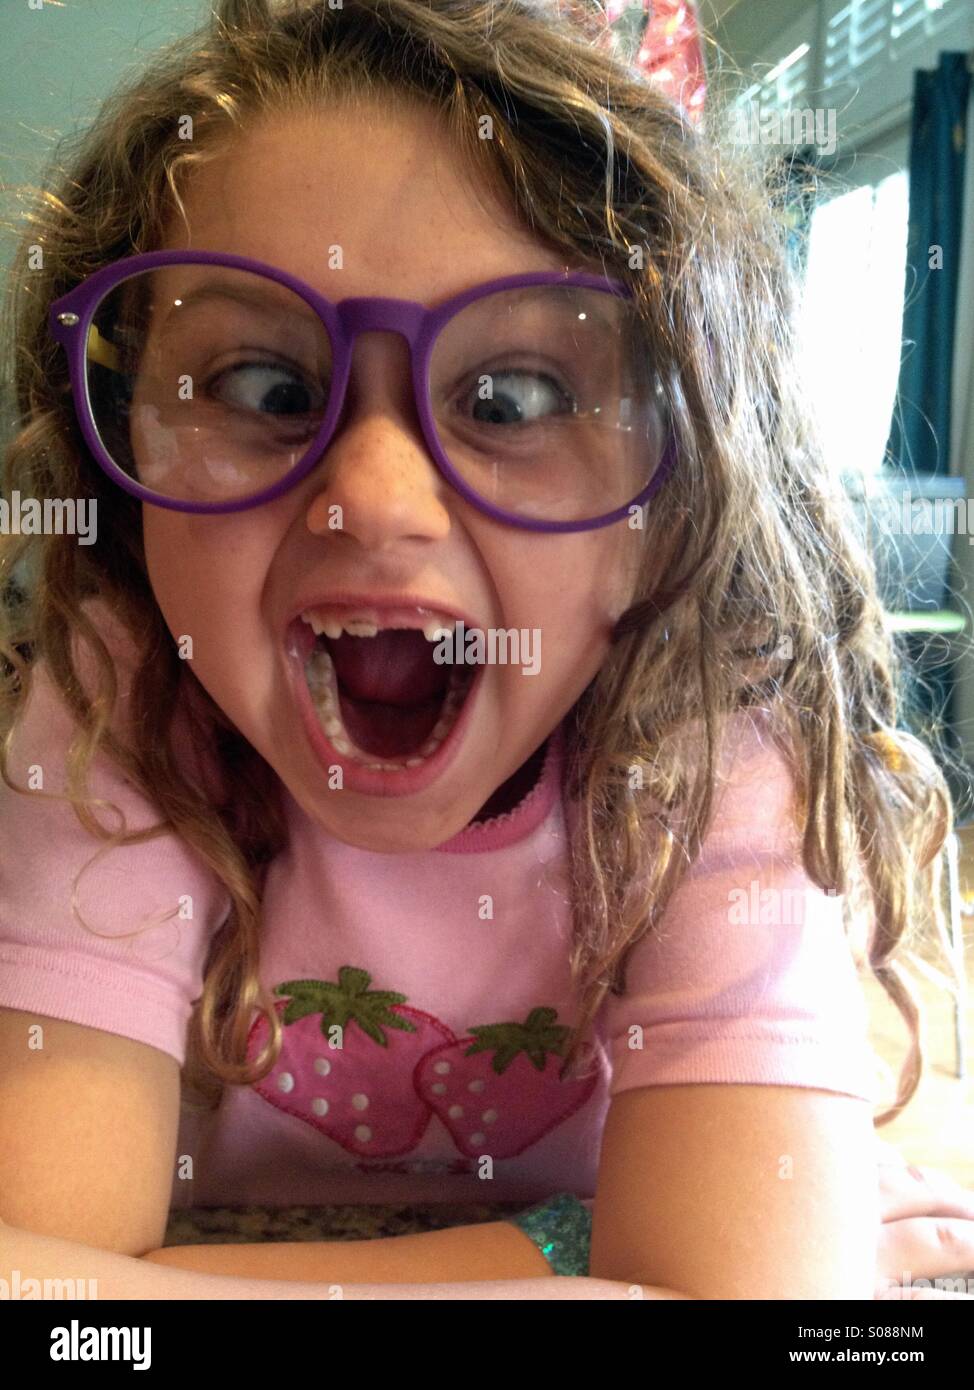 Young girl wearing big glasses and front teeth missing and playing cross eyed. Stock Photo